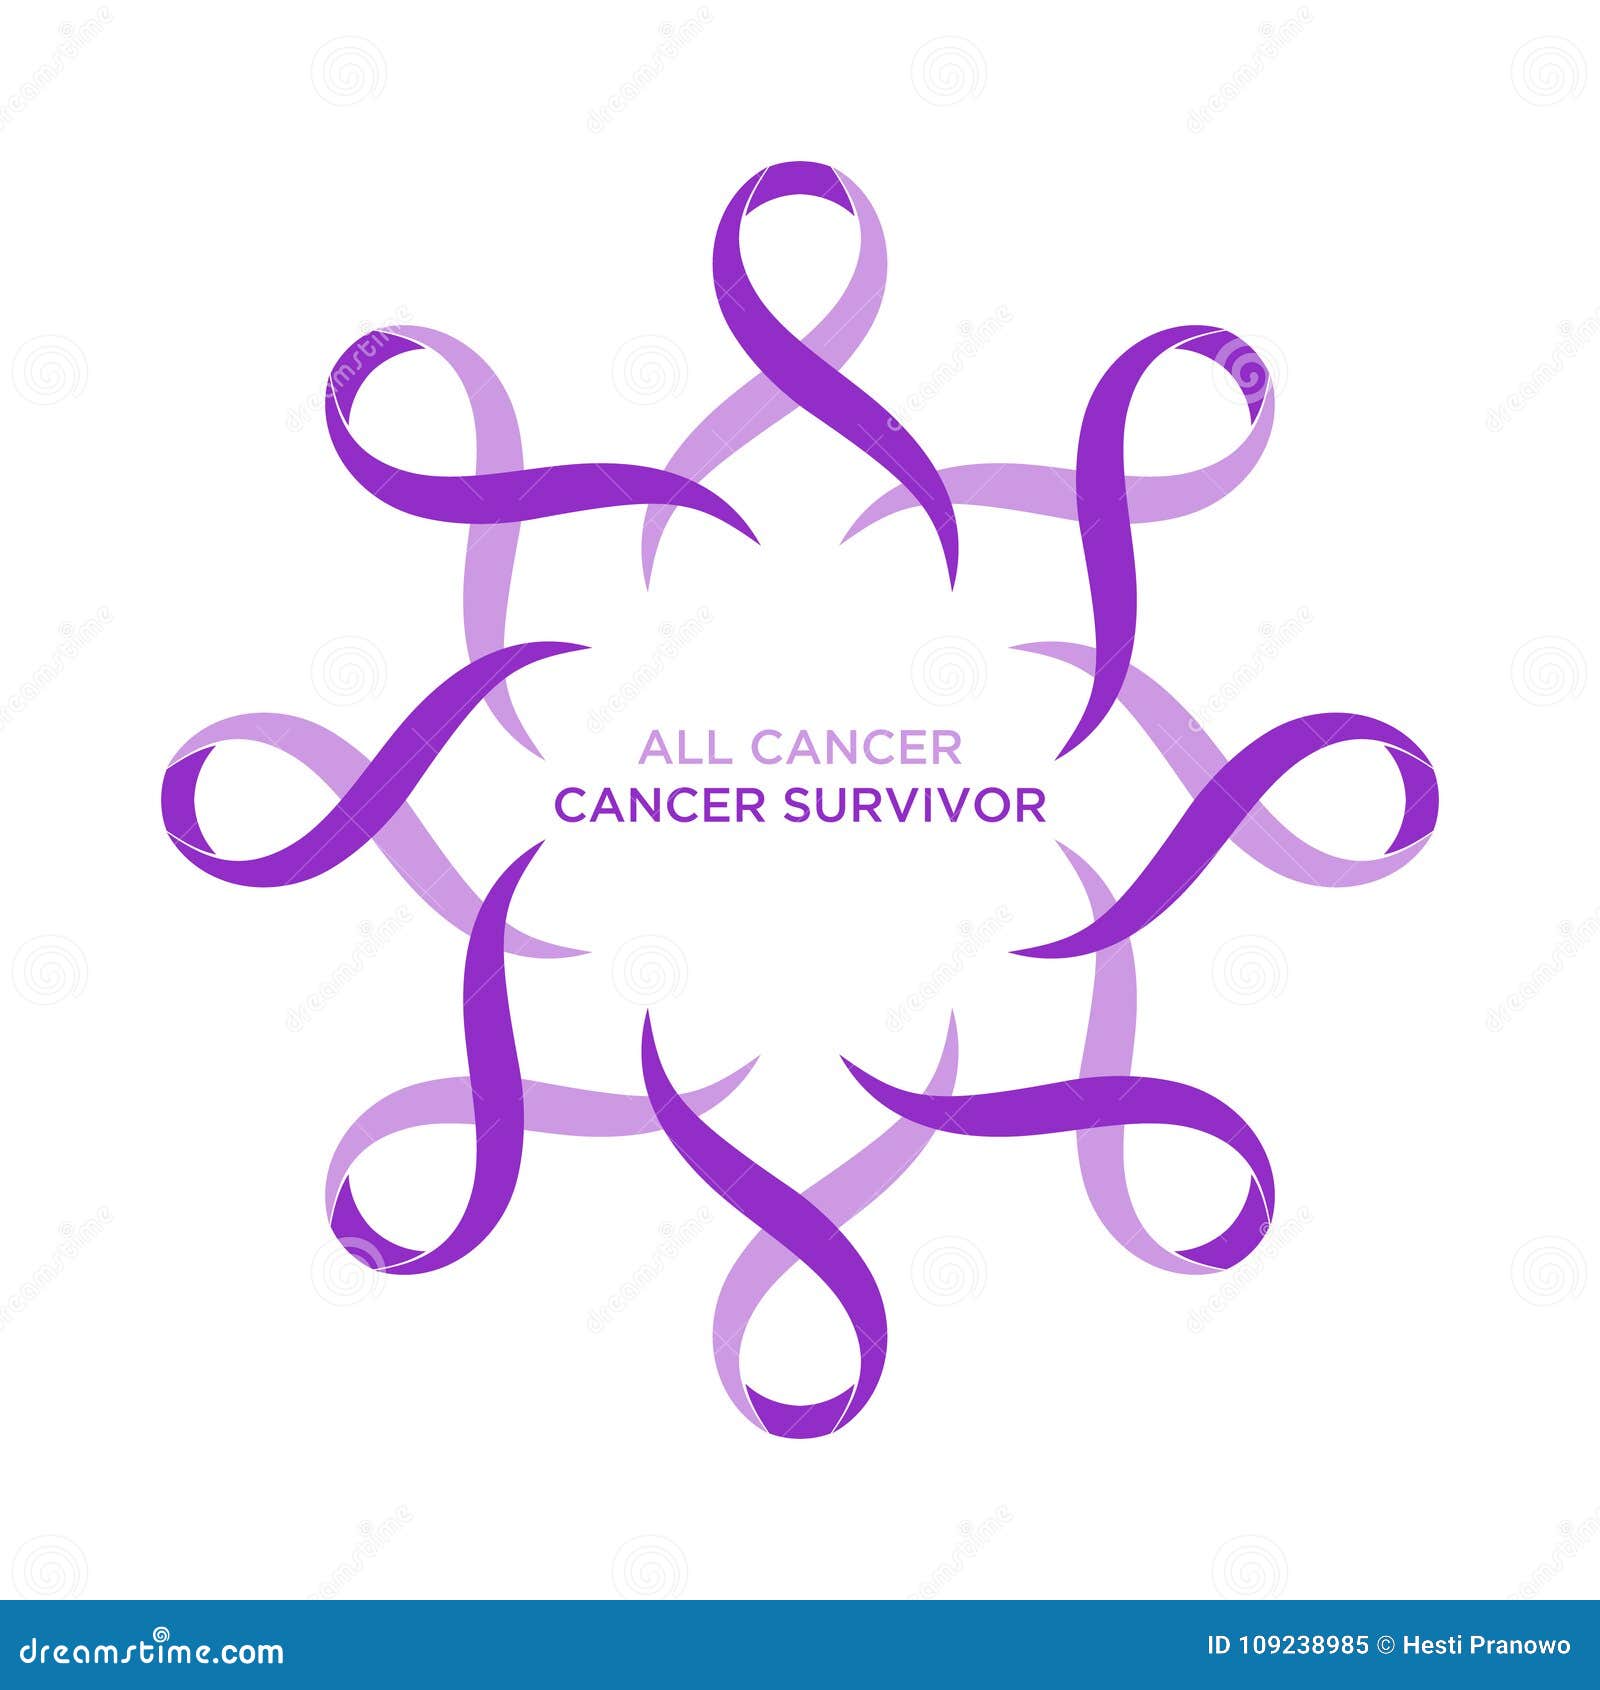 cancer ribbon lavender or purple color representing the support of tackling cancers